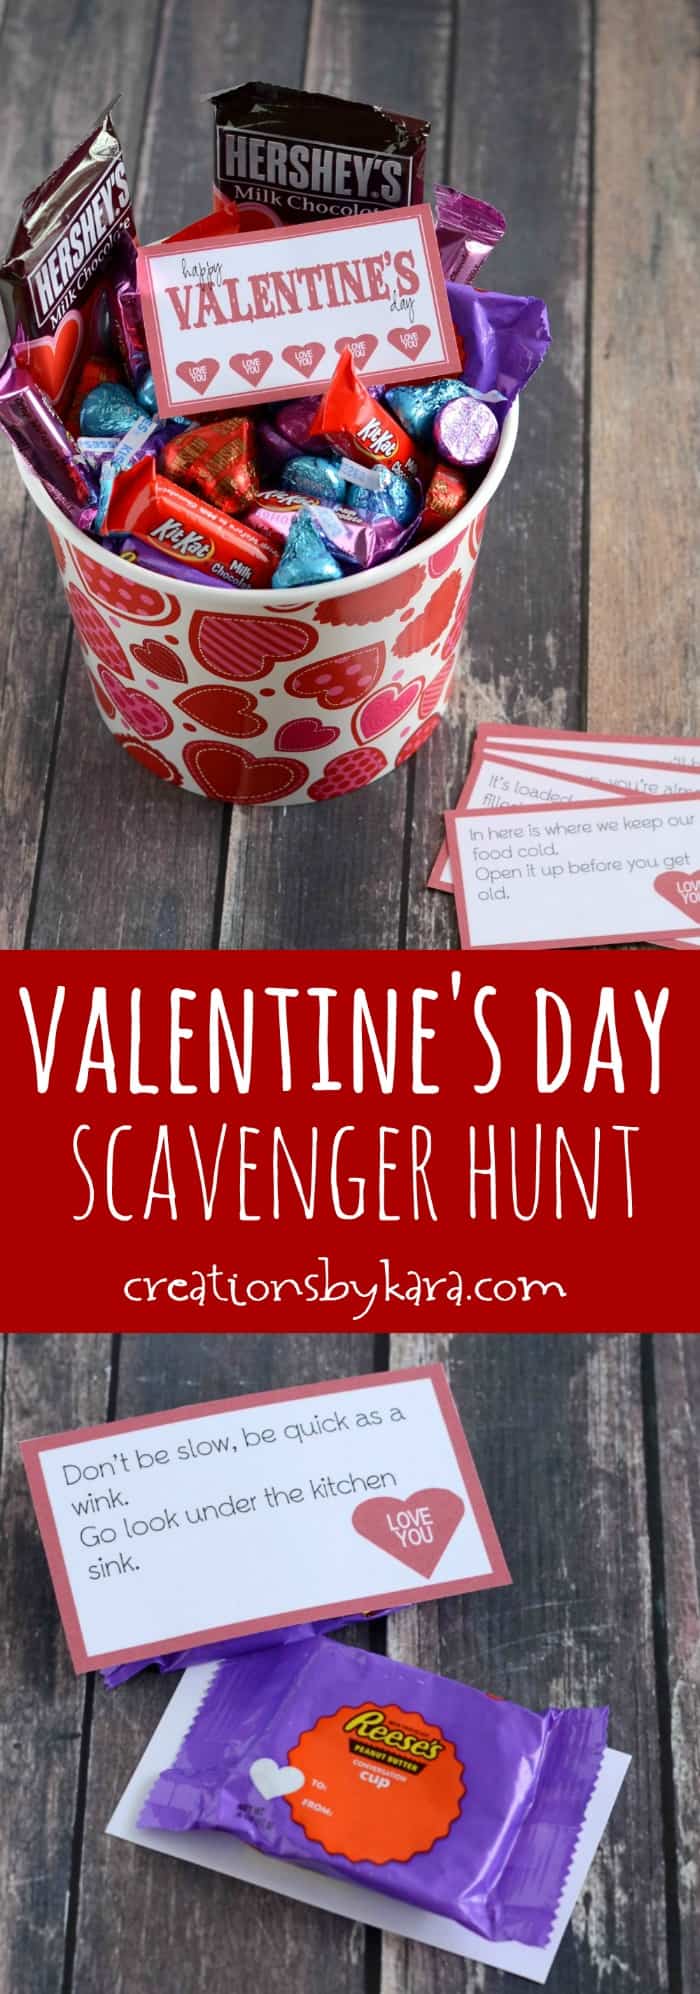 Valentines Day scavenger hunt clues with candy